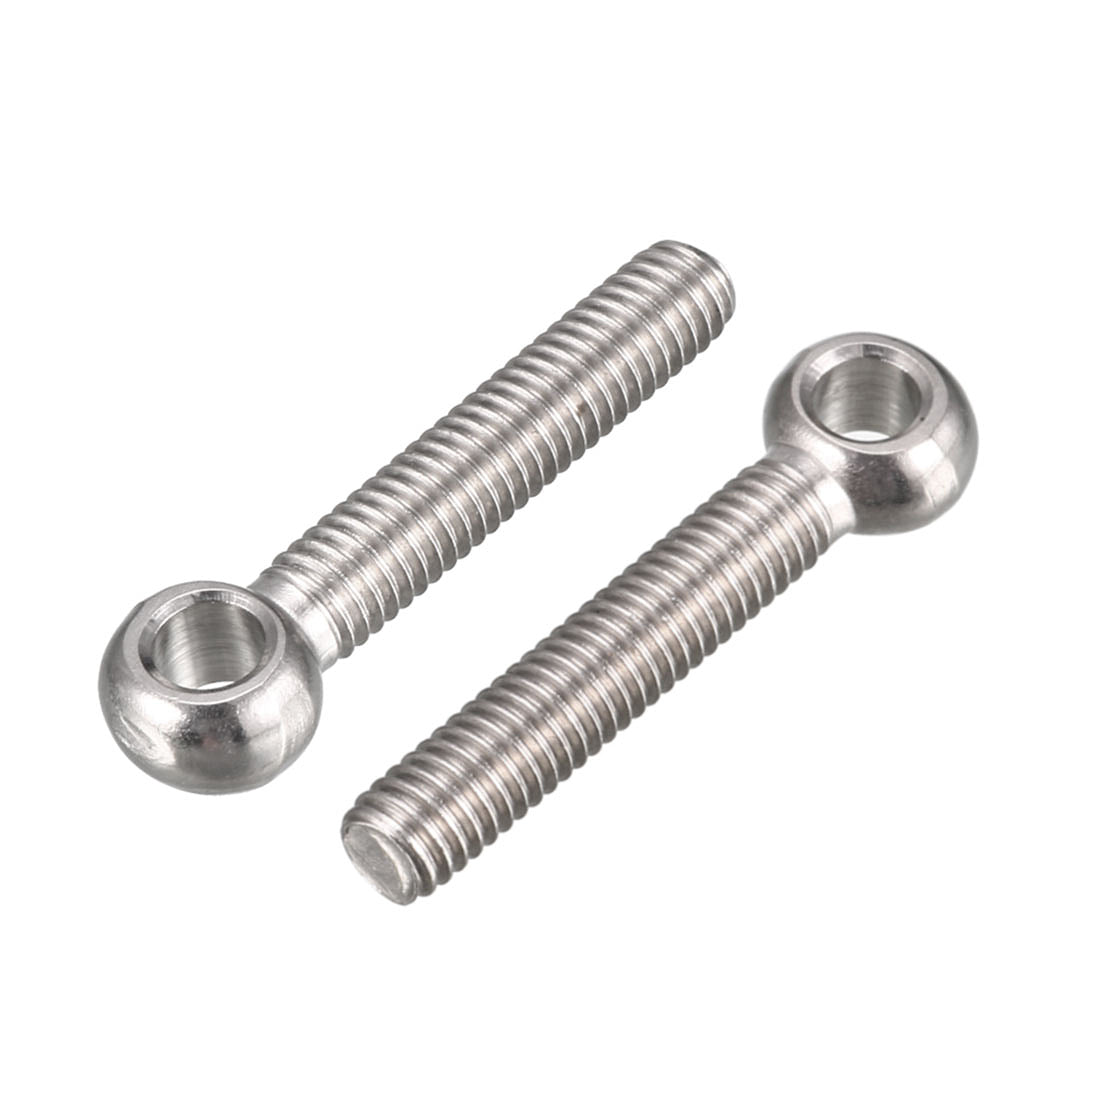 uxcell Uxcell 6mm x 35mm 304 Stainless Steel Machinery Lifting Swing Eye Bolt 12PCS